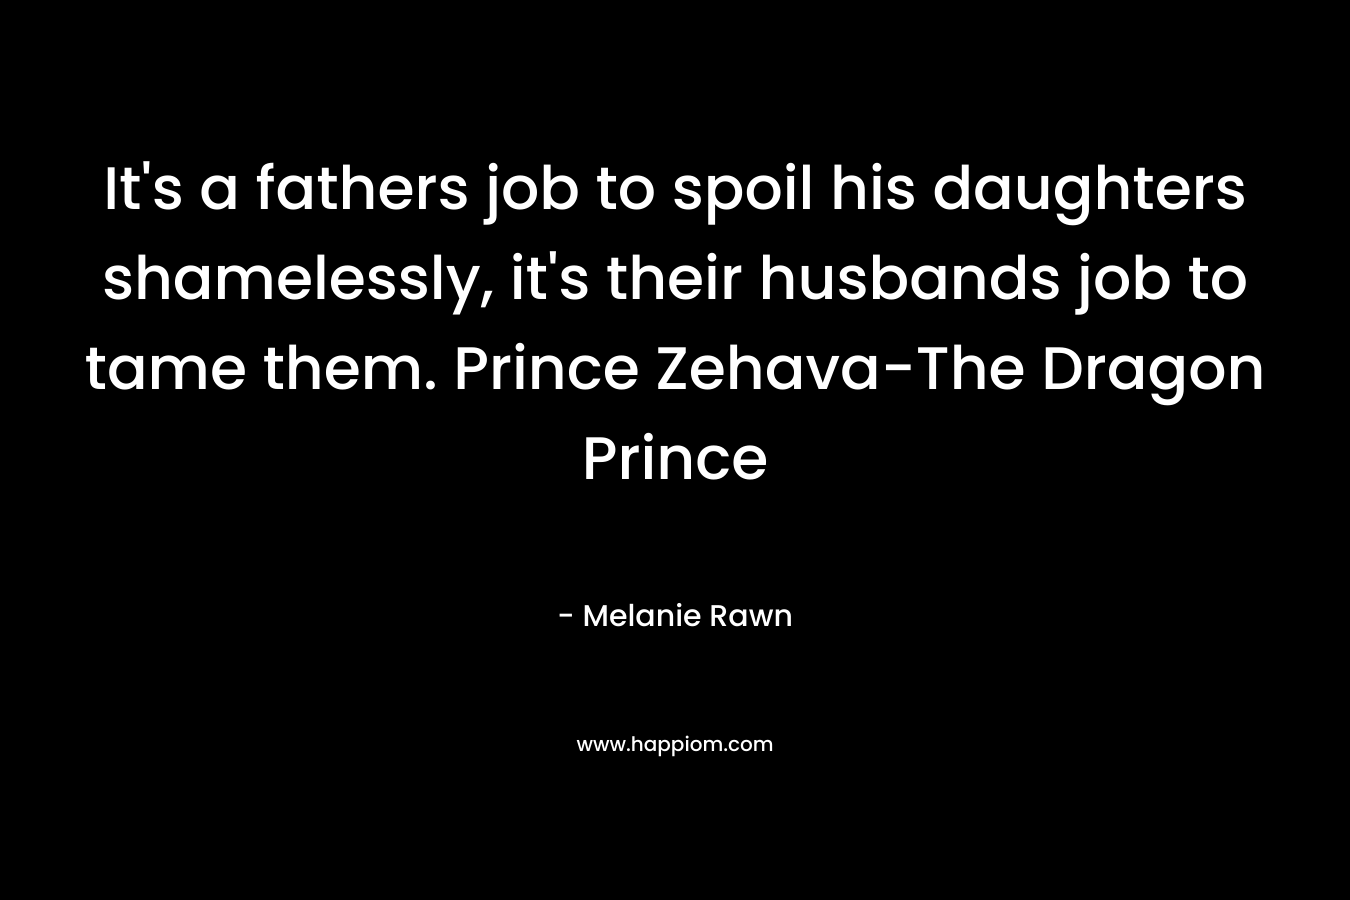 It’s a fathers job to spoil his daughters shamelessly, it’s their husbands job to tame them. Prince Zehava-The Dragon Prince – Melanie Rawn